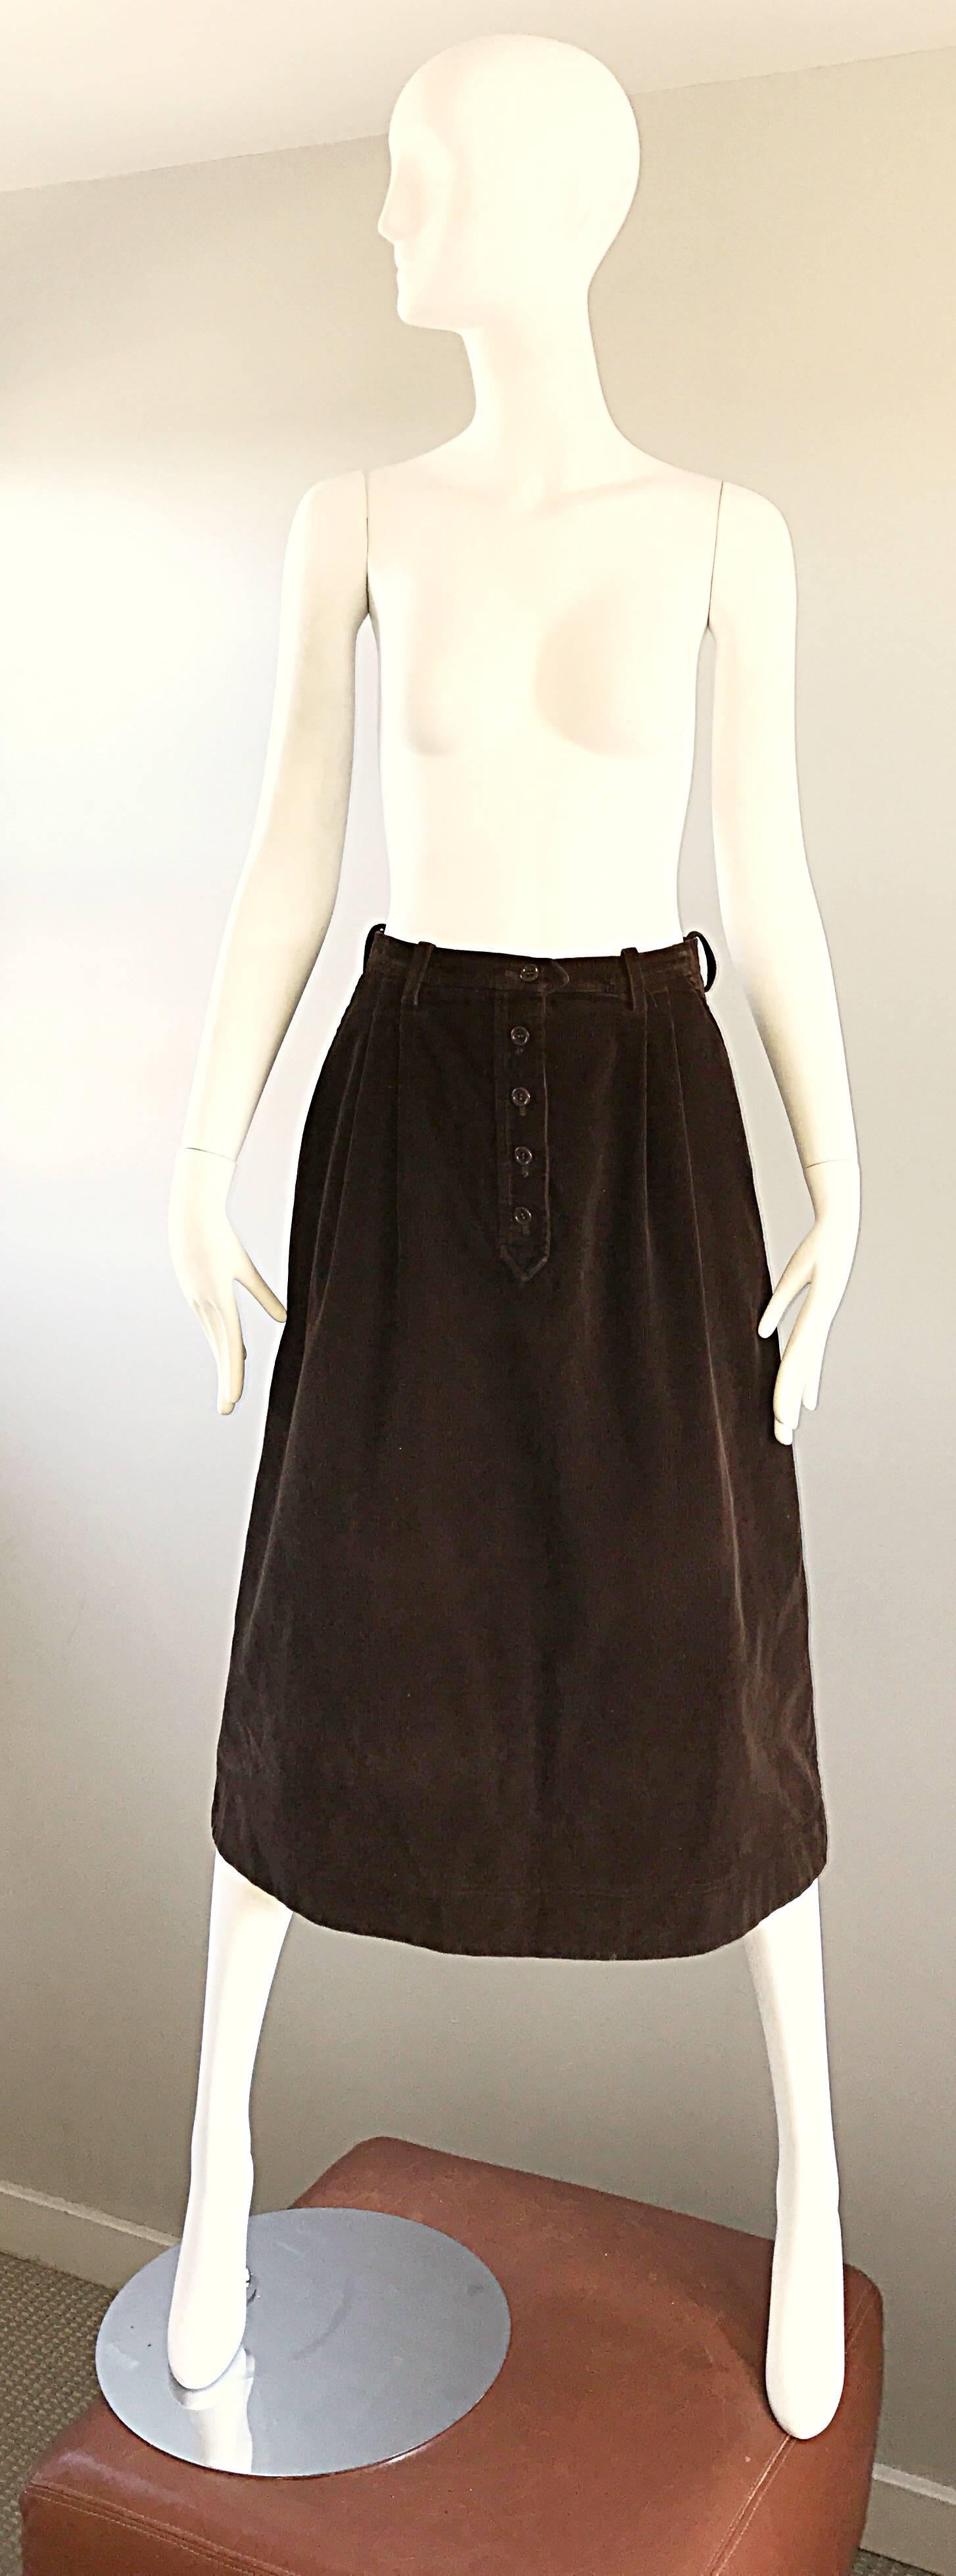 Chic late 1960s 60s / early 70s YVES SAINT LAURENT 'Rive Gauche' fine chocolate brown corduroy A-Line midi skirt! Super flattering fit, with the softest cotton corduroy fabric! Buttons up the front. Can easily be dressed up or down. In great unworn